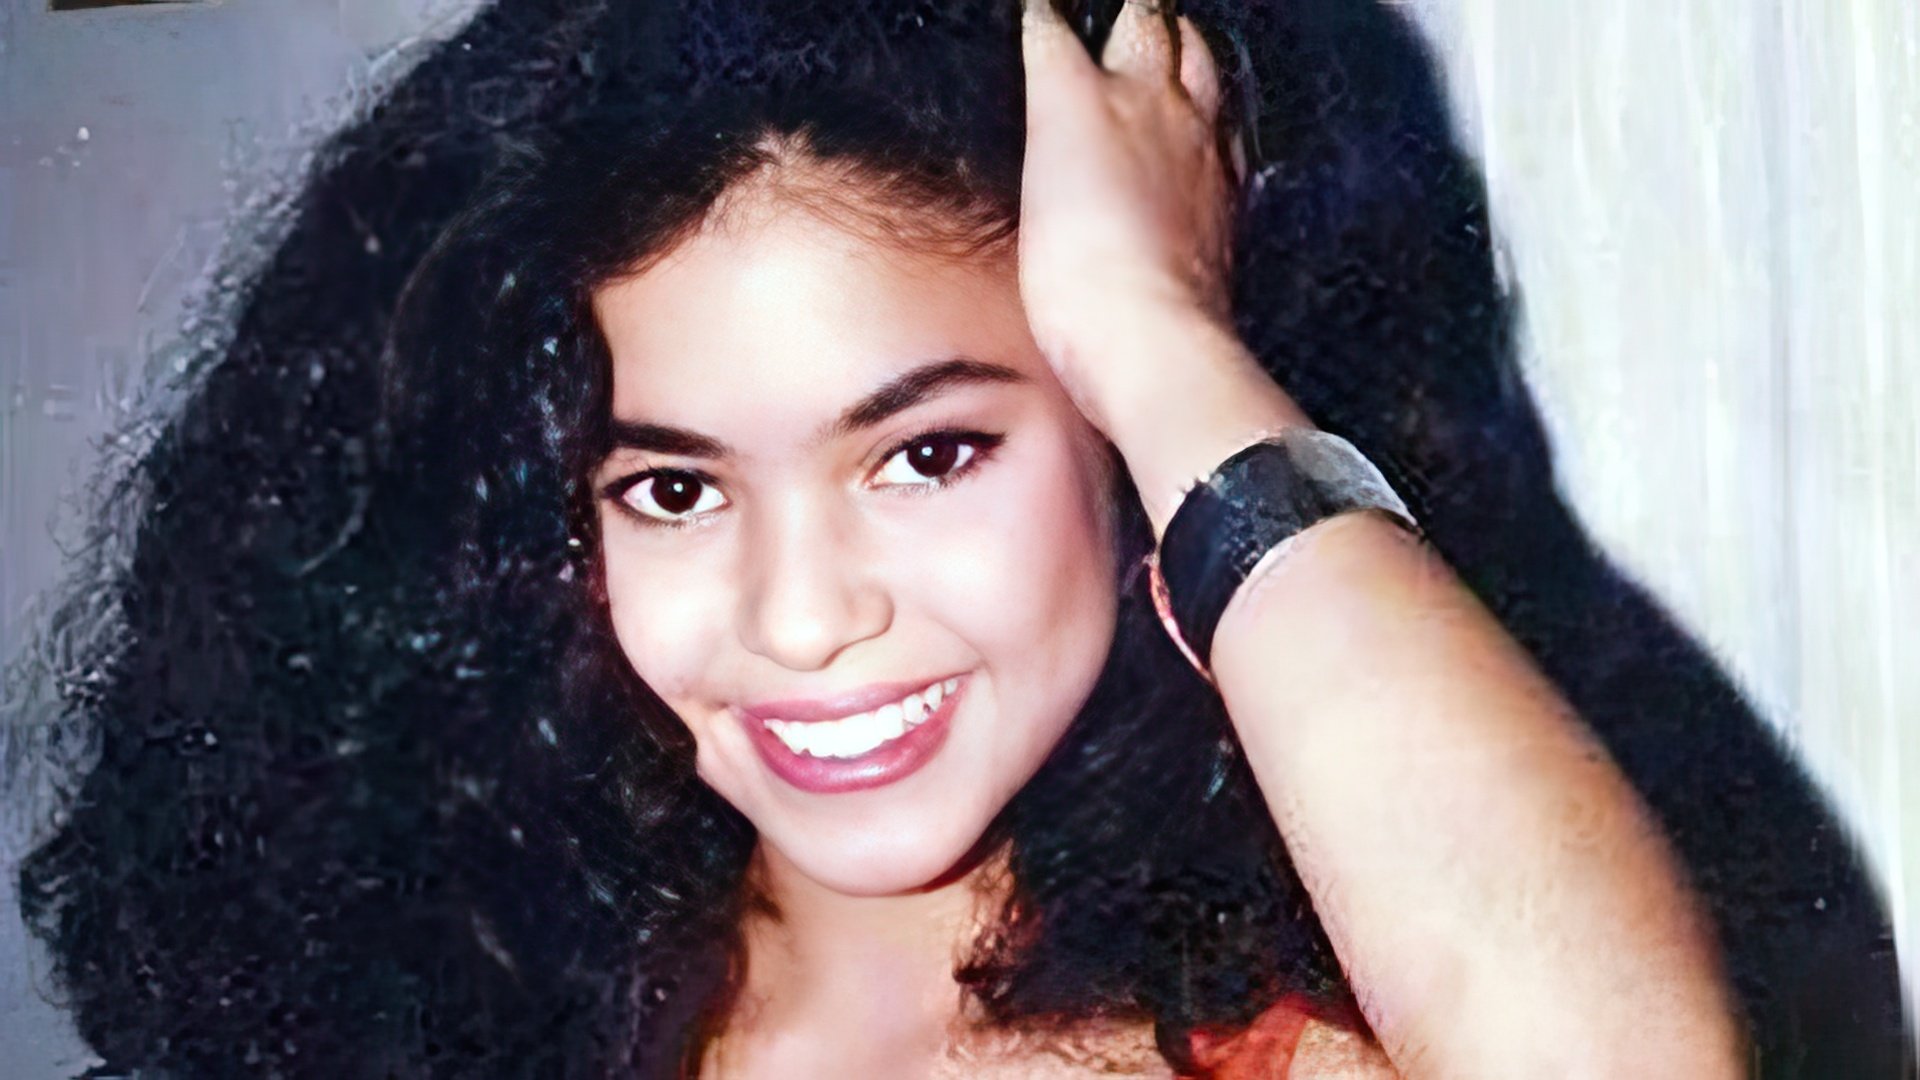 Little Shakira was a gifted child